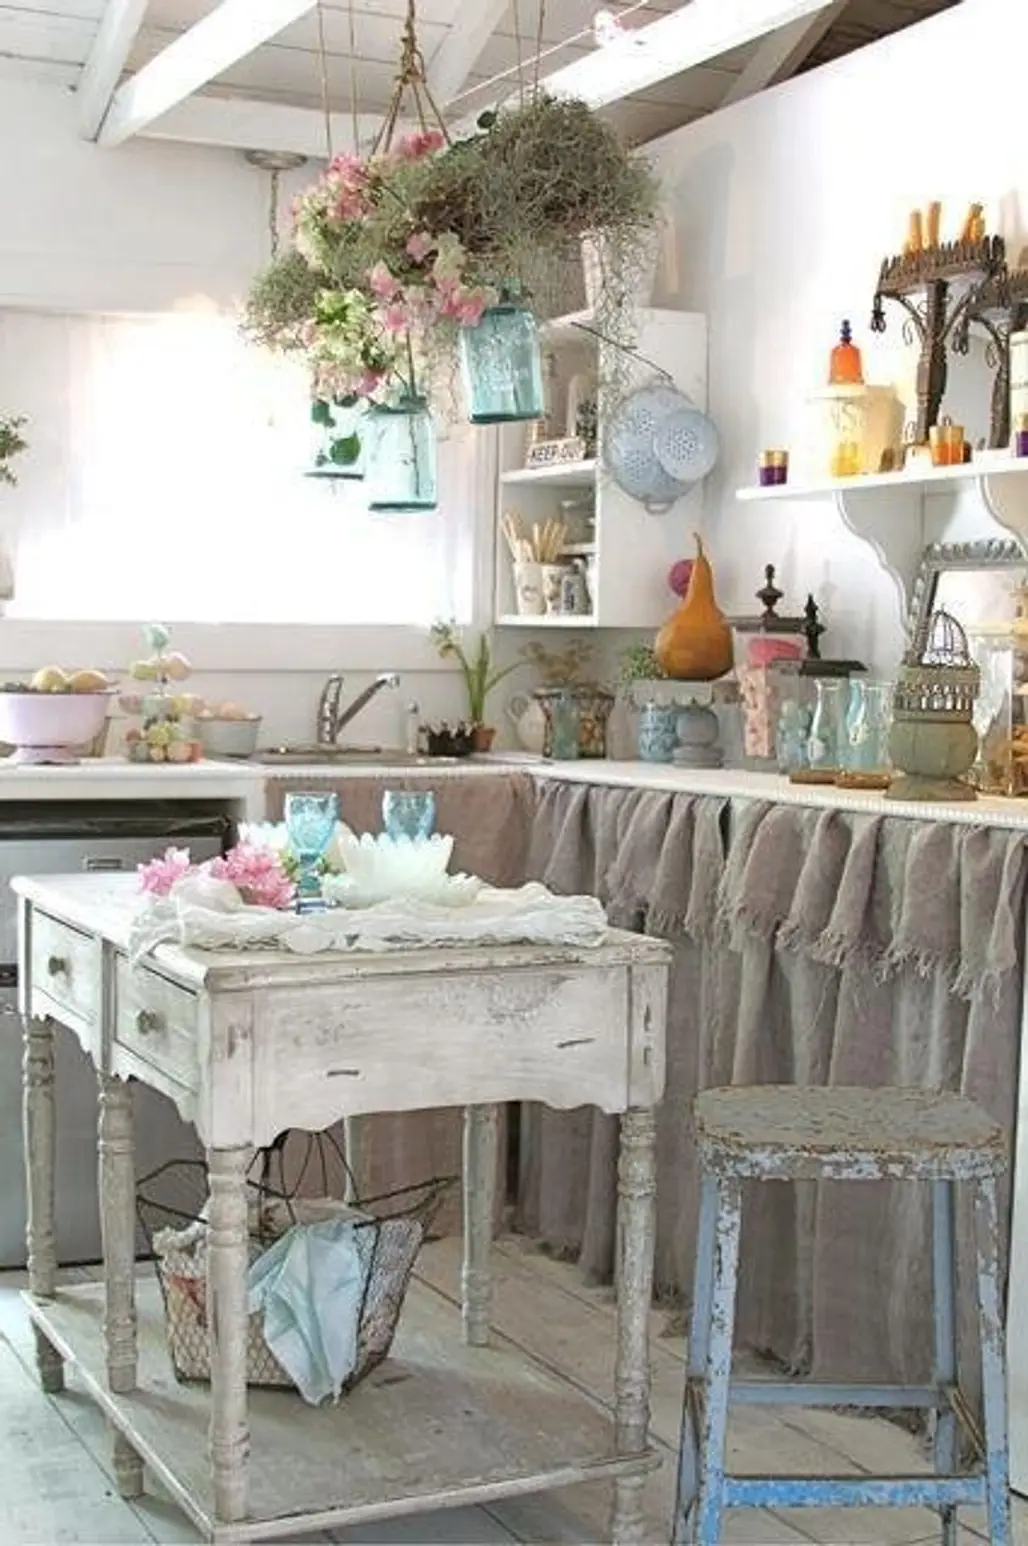 The Shabby Chic Look